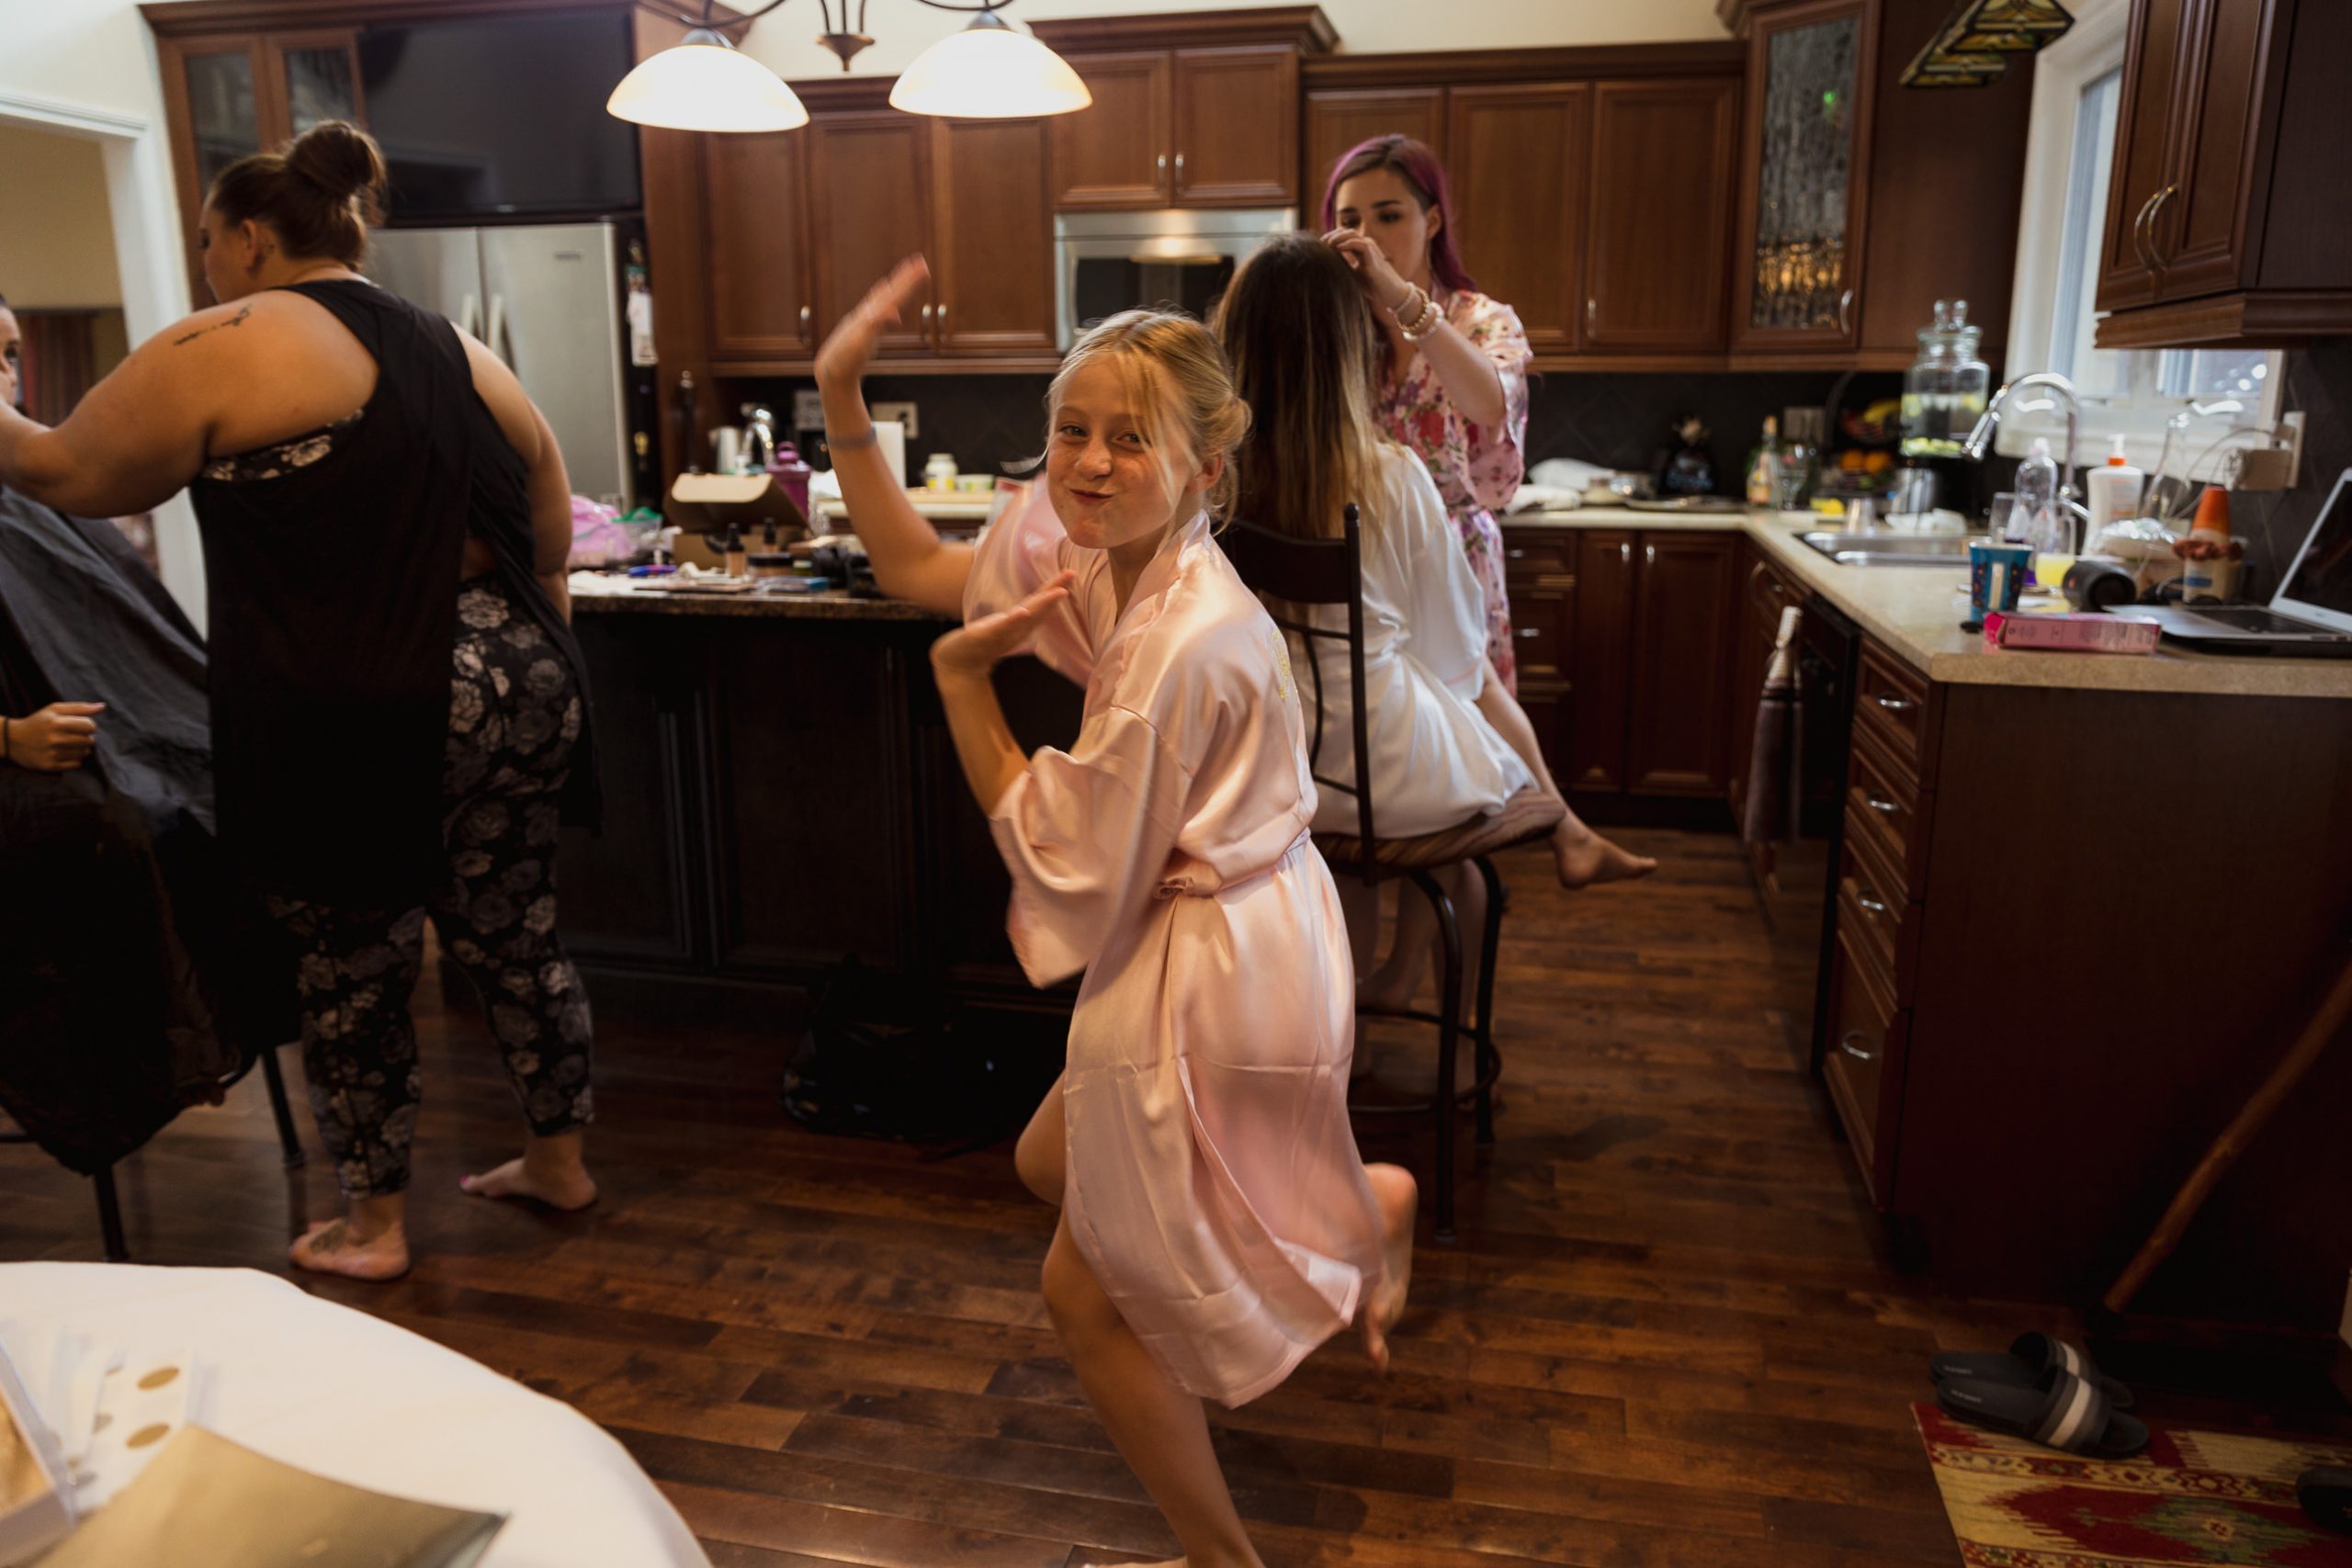 Wedding photos girls getting ready flower girl dancing in the kitchen in her bridesmaid robe